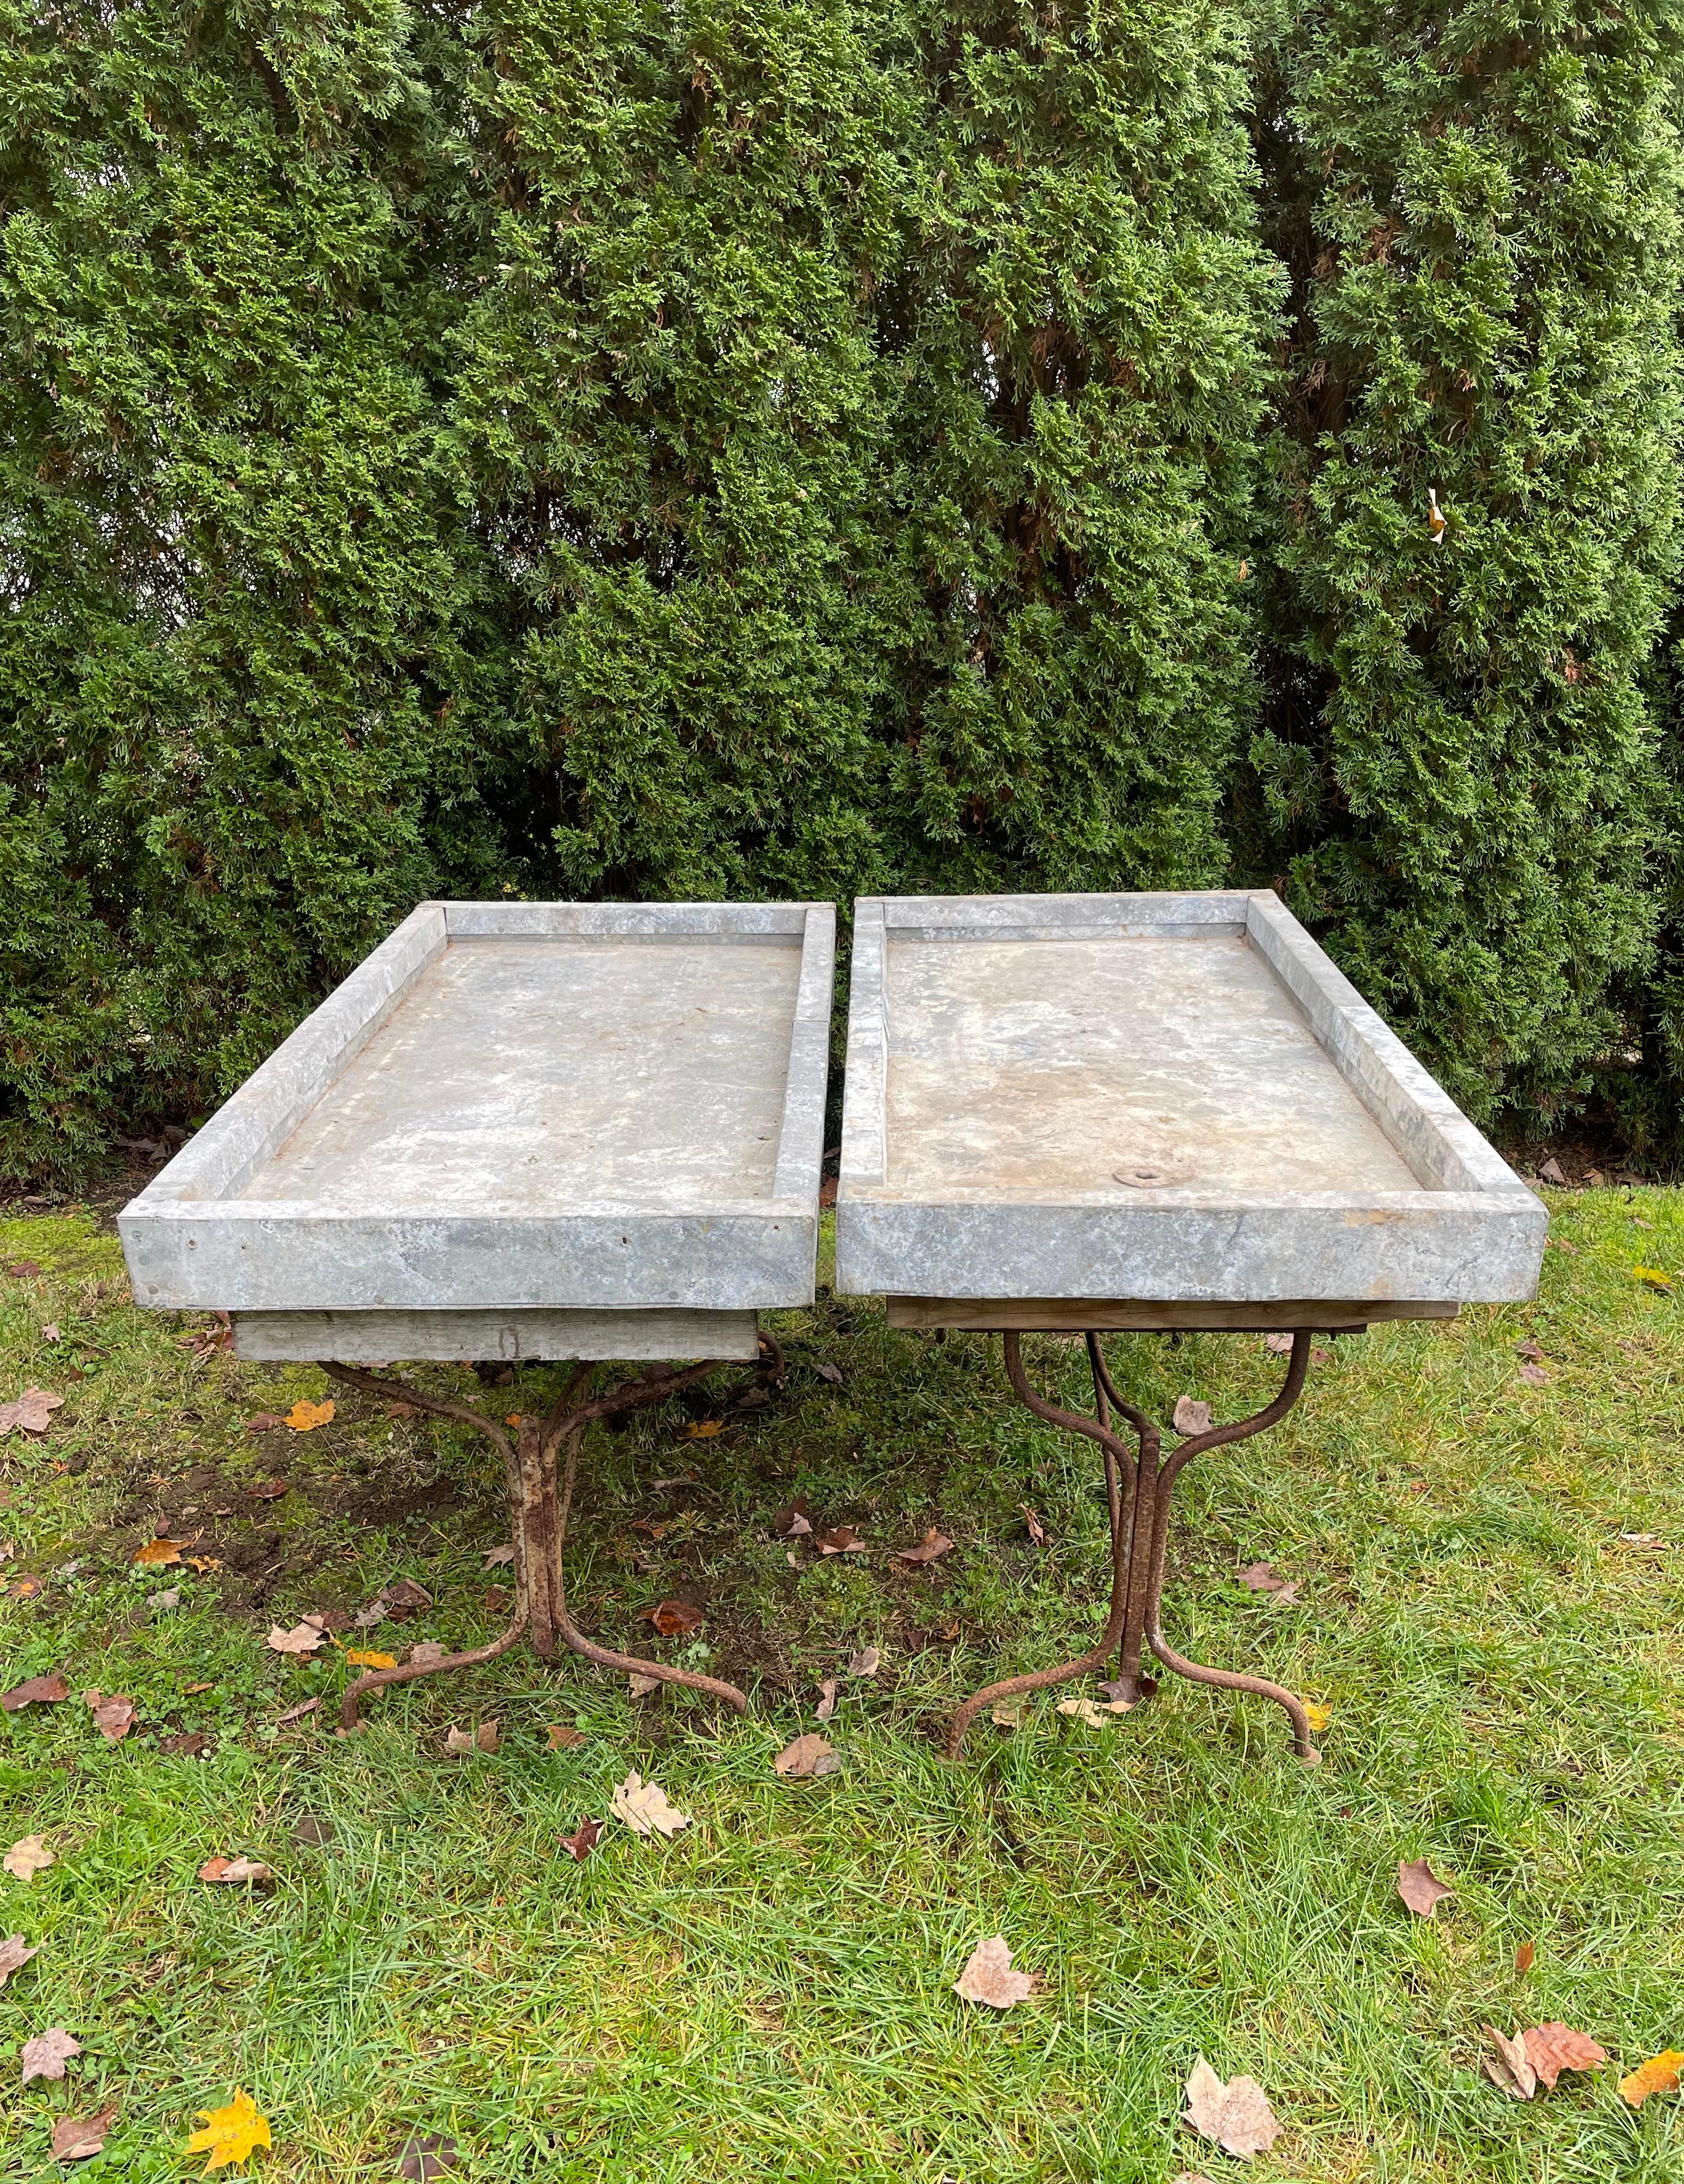 Antique potting tables in good condition are very difficult to source, particularly ones in zinc with lovely patinas. These are stunners and have commodious wells with drain holes atop old wrought iron bases with curved legs. Fully functional, they